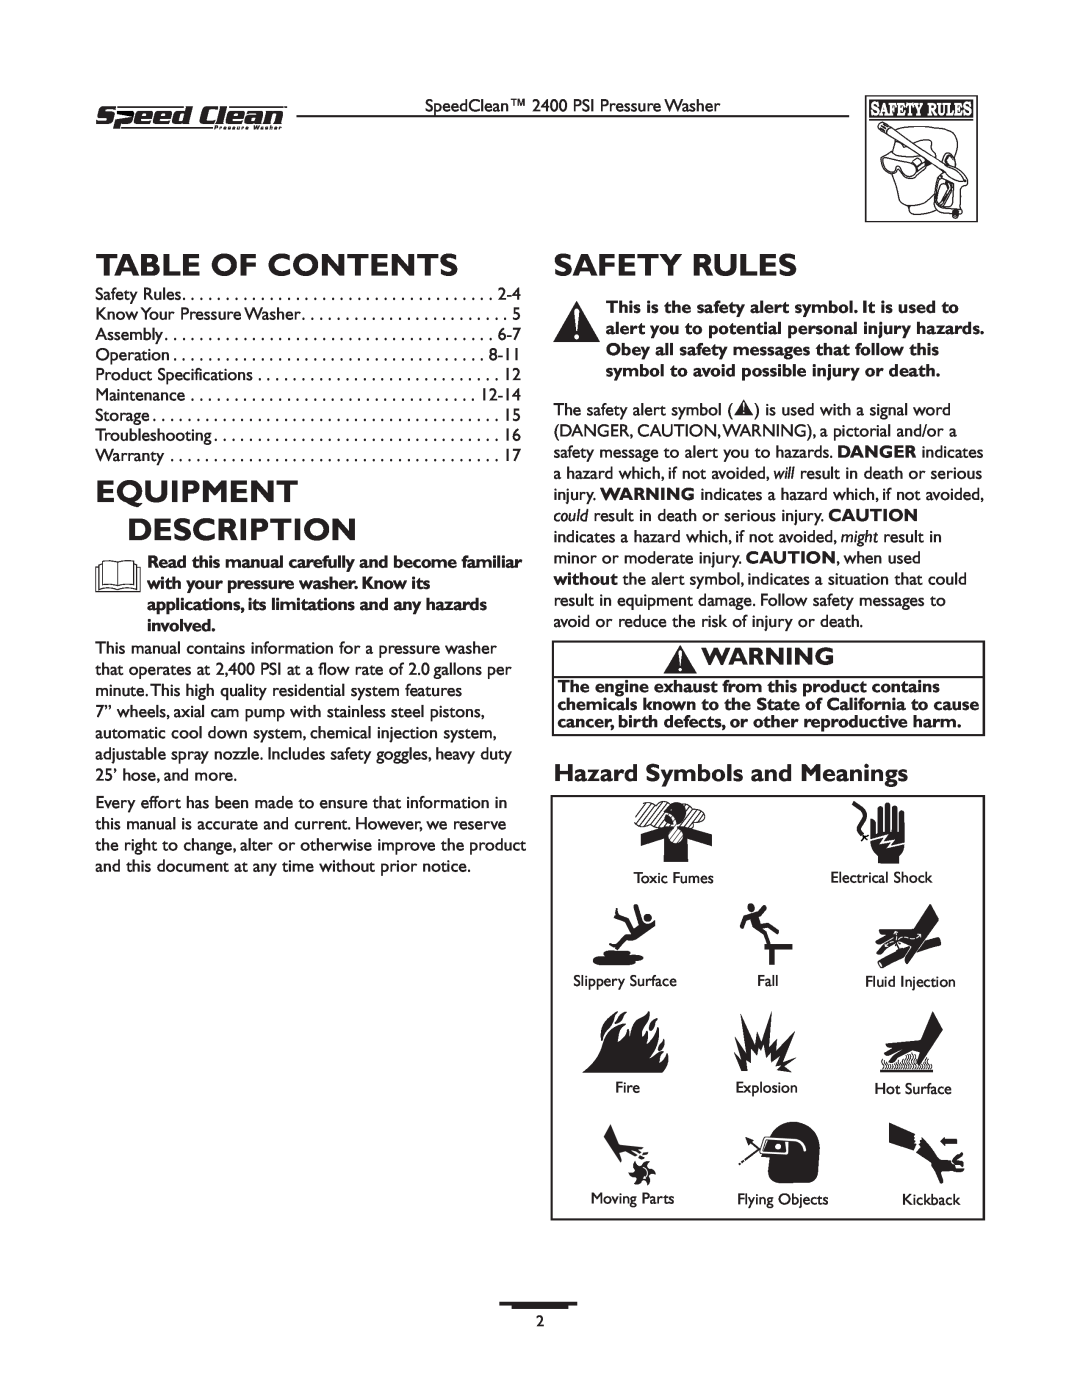 Briggs & Stratton 020227-0 owner manual Table Of Contents, Equipment Description, Safety Rules, Hazard Symbols and Meanings 